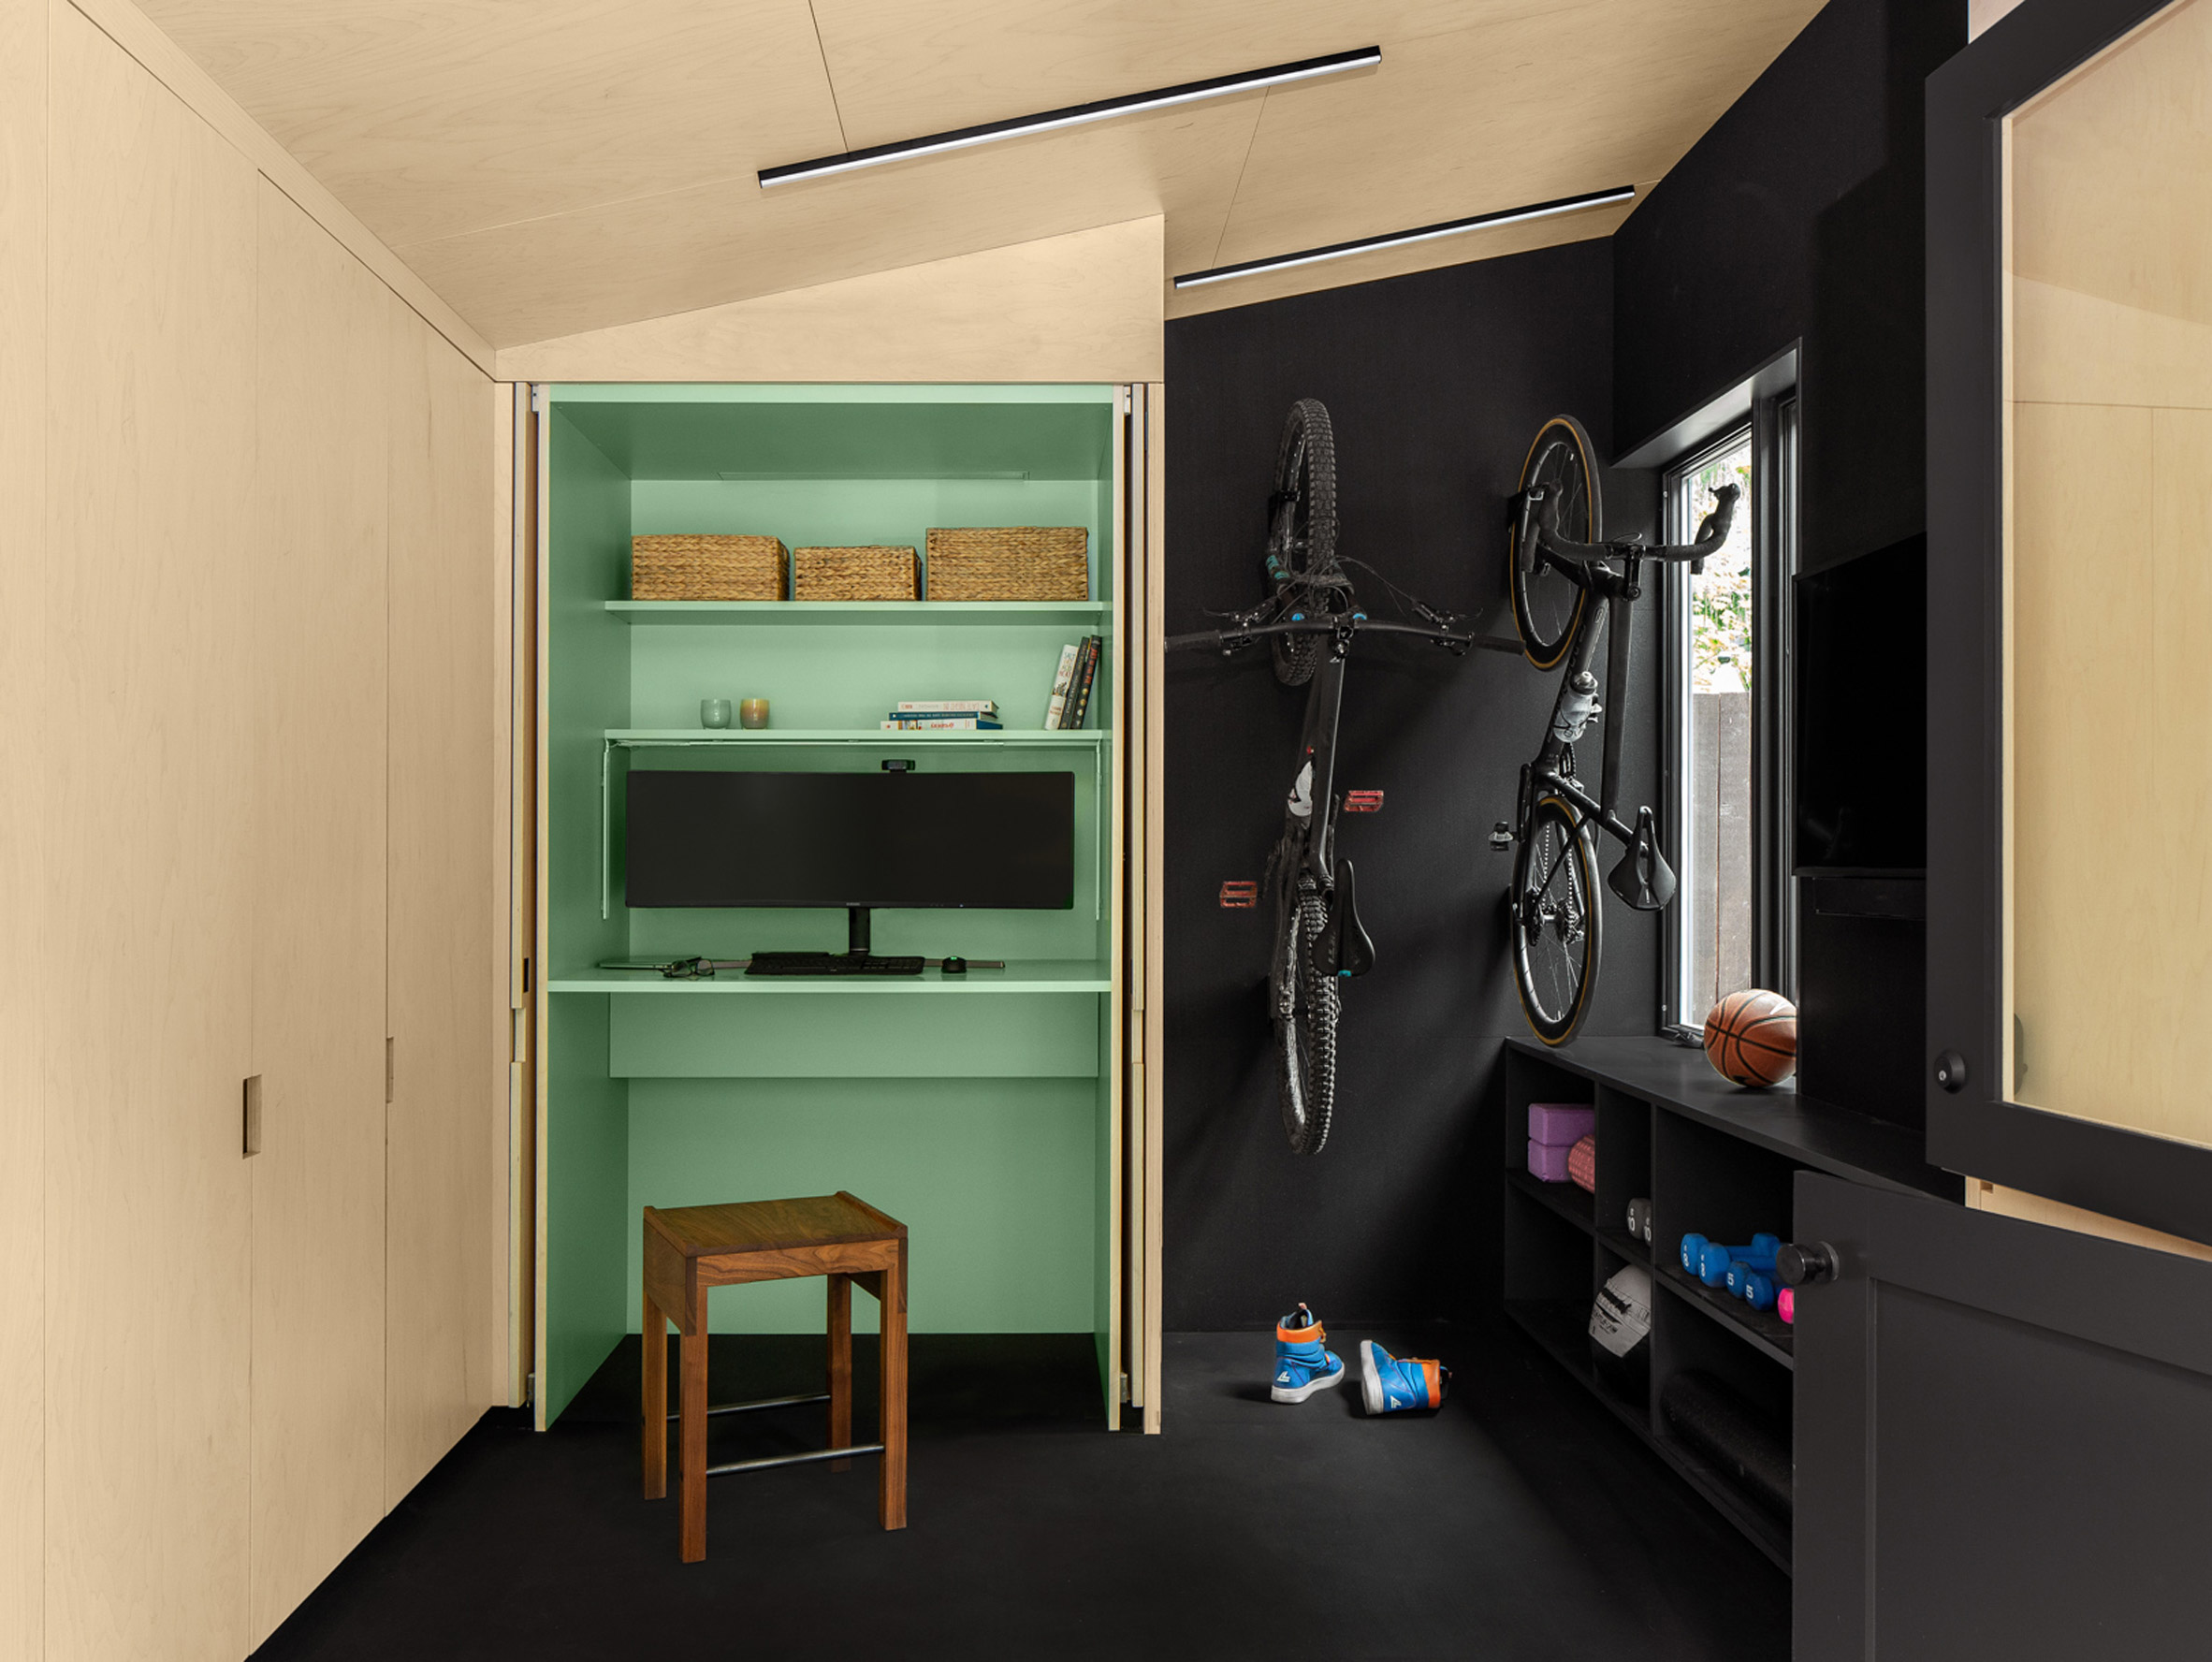 A sea-green coloured built in desk and bikes hanging on the wall